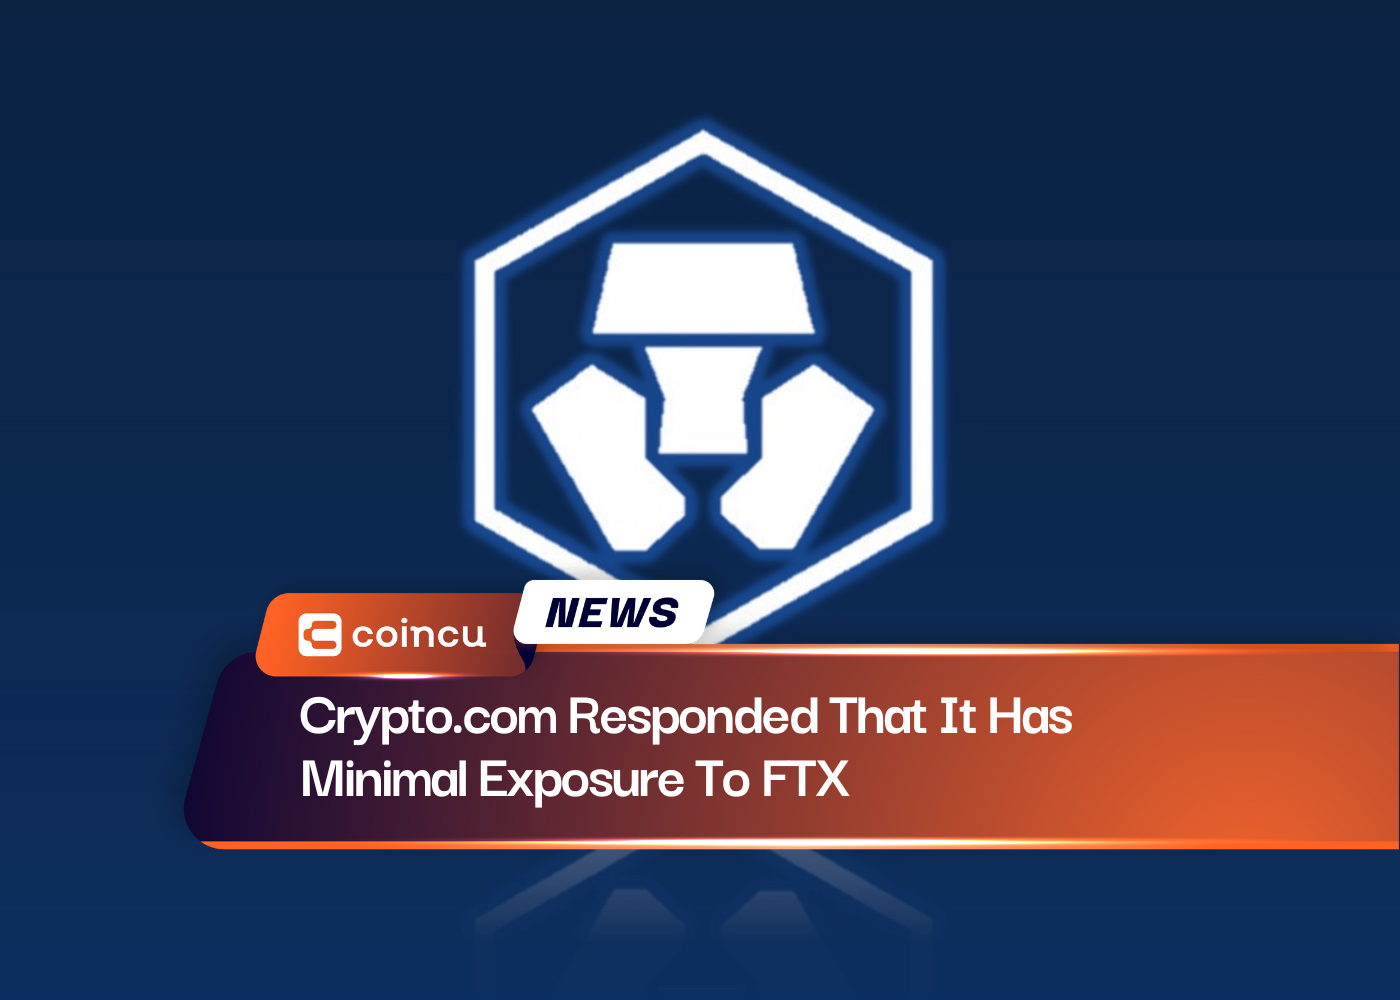 Crypto.com Responded That It Has Minimal Exposure To FTX